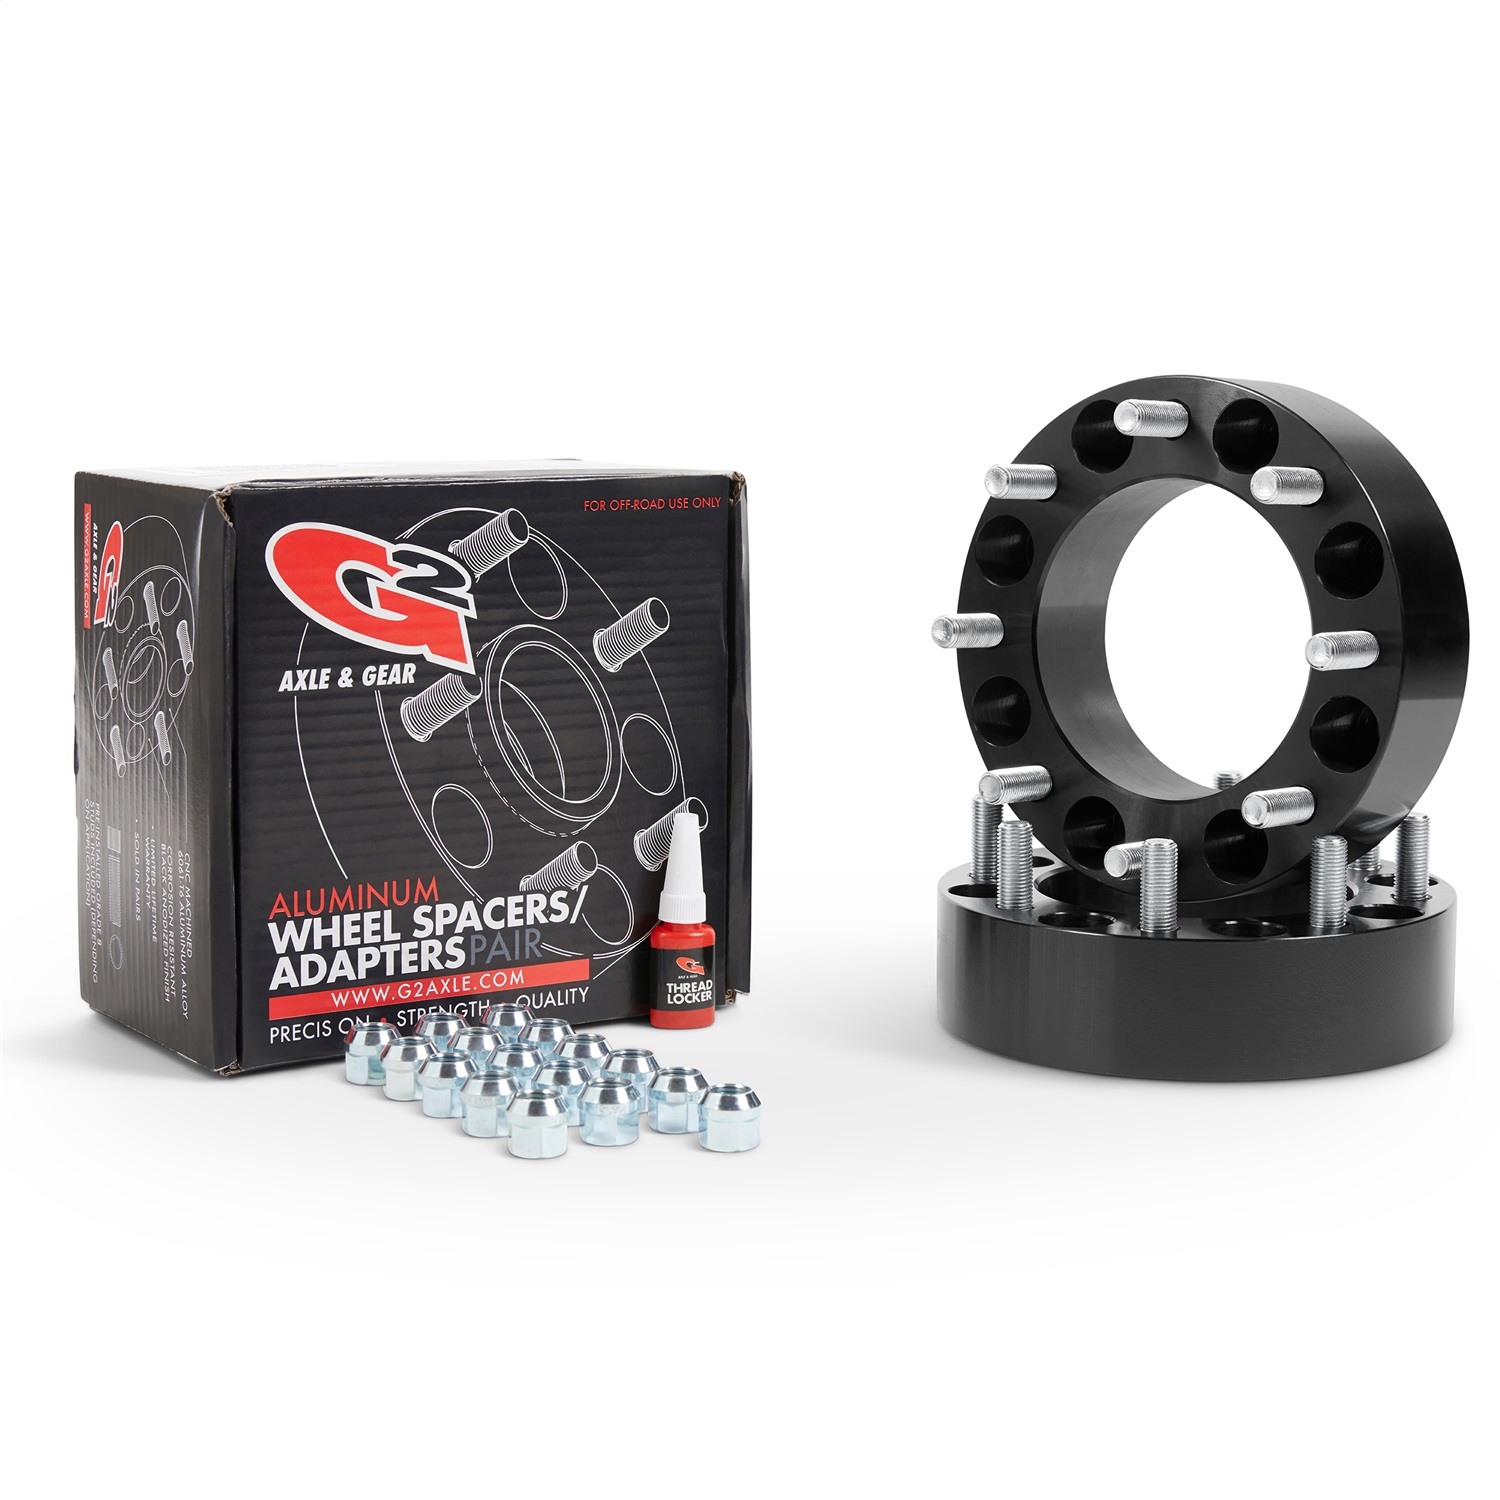 G2 Axle and Gear 93-82-200 Wheel Spacer